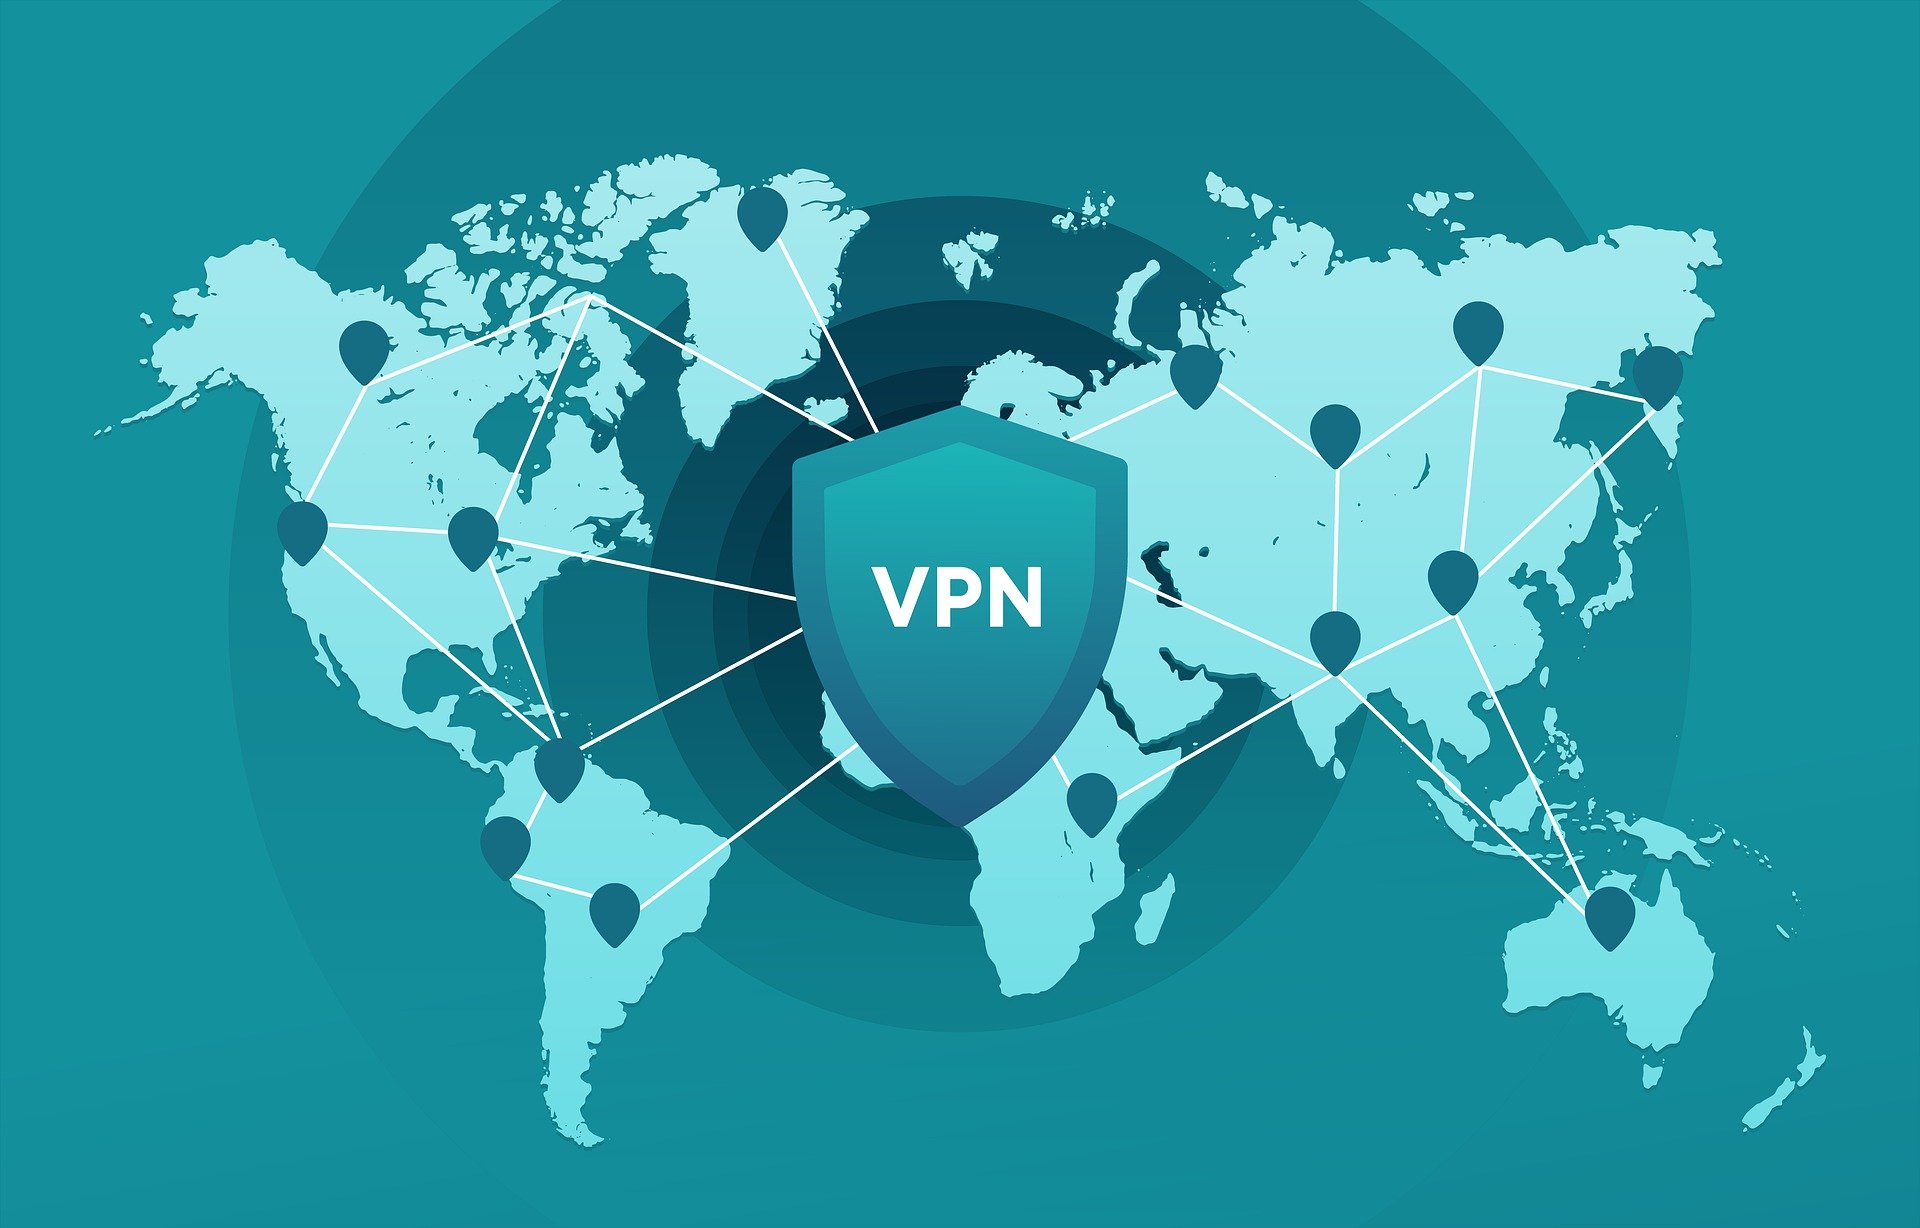 Common VPN Scams and How to Negate Them